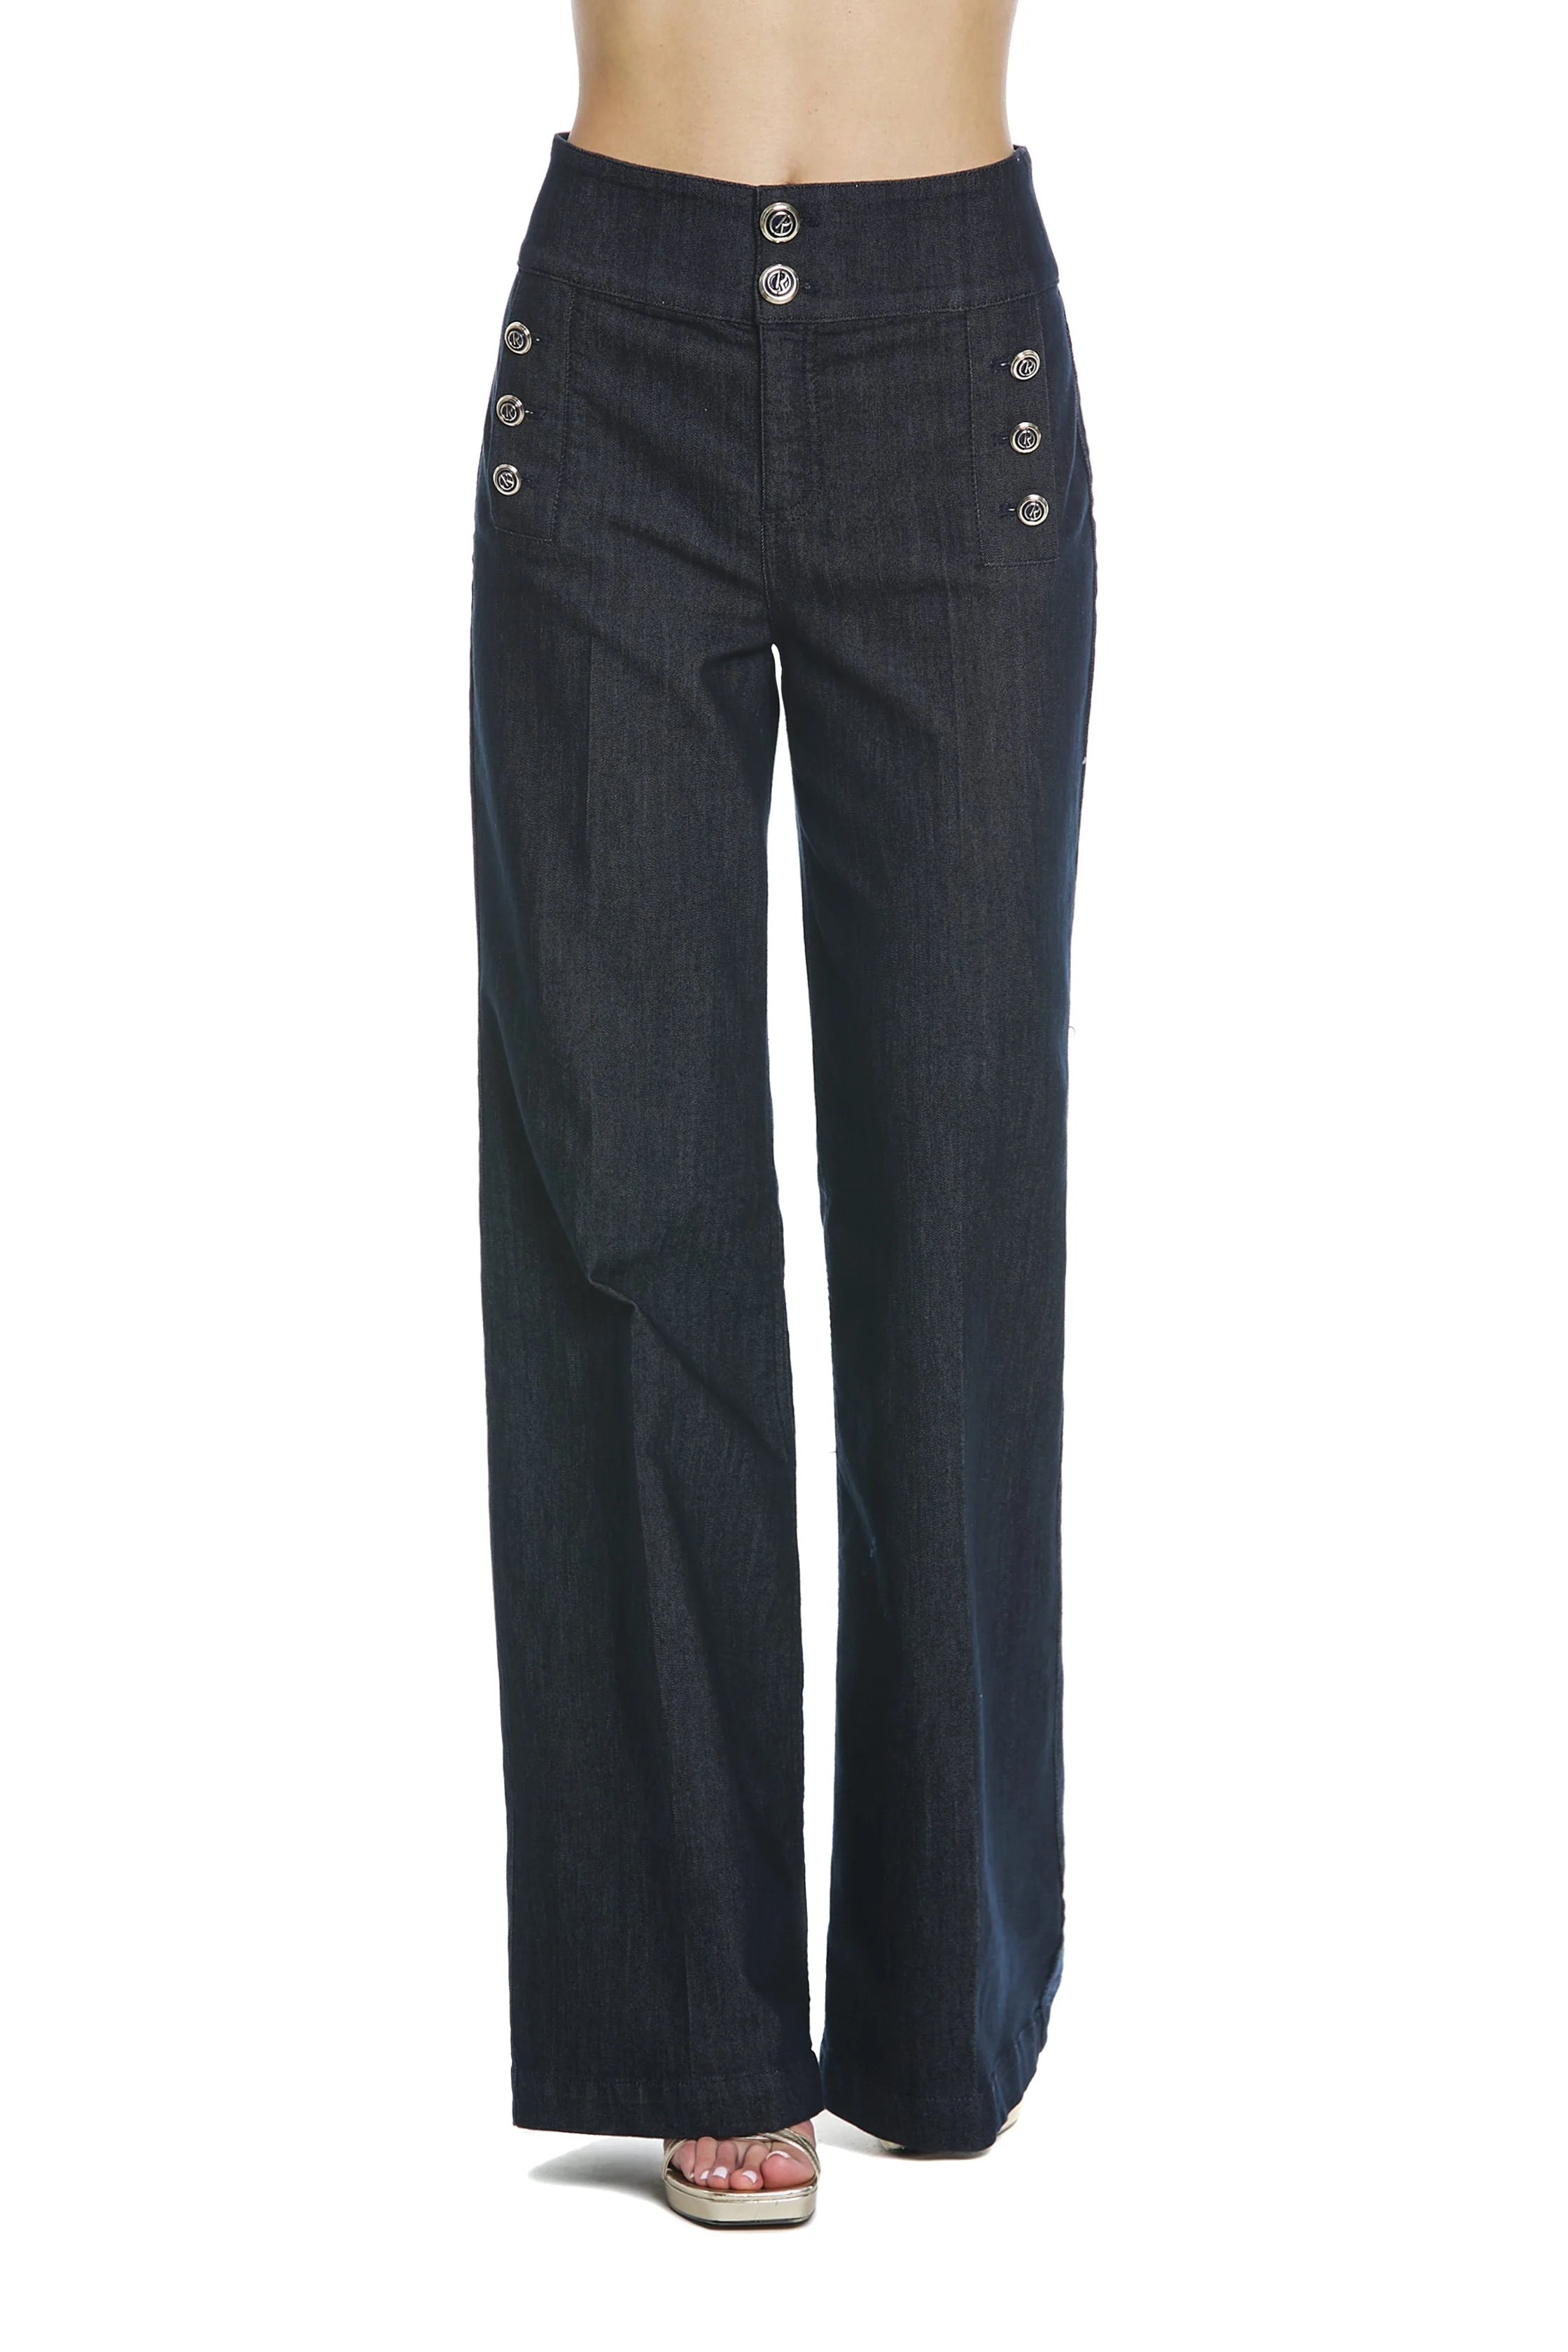 Denim Pants With Golden Buttons RELISH